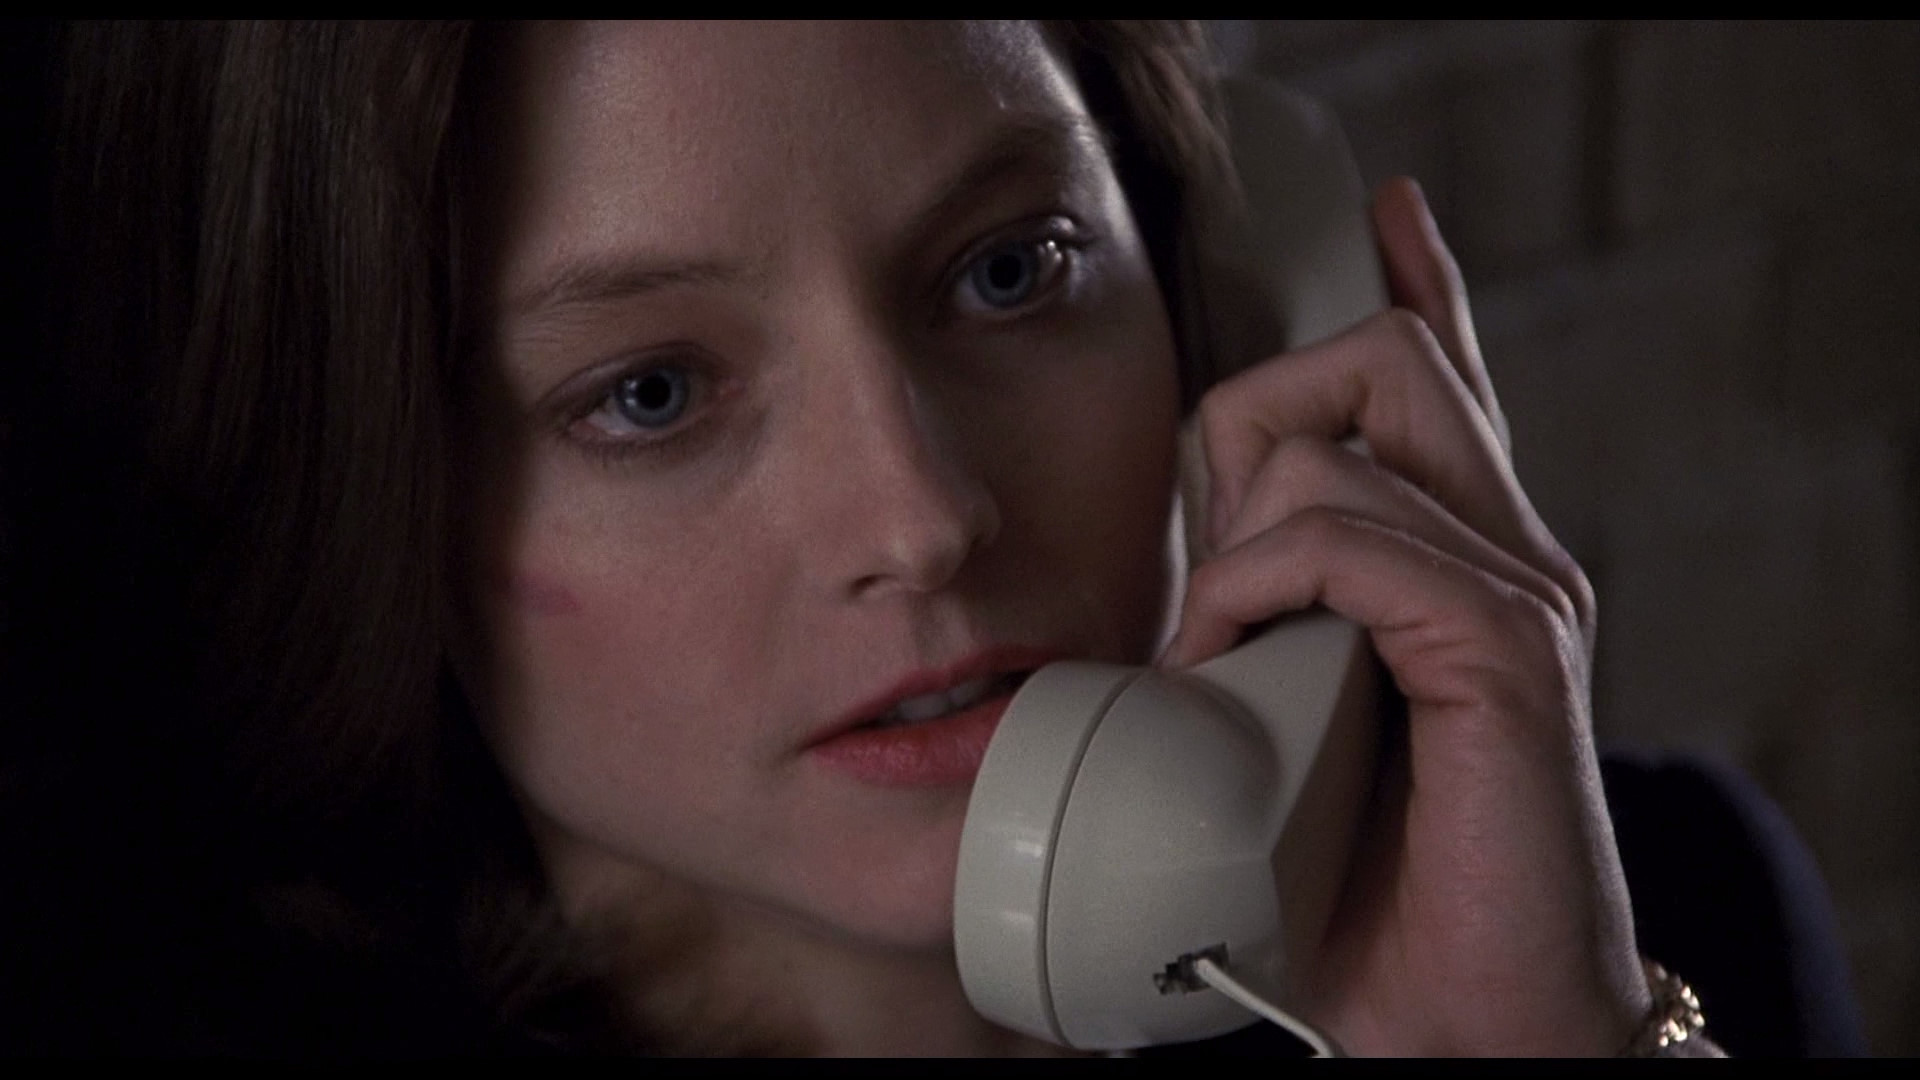 The Silence Of Lambs HD Wallpaper In Movies Imageci